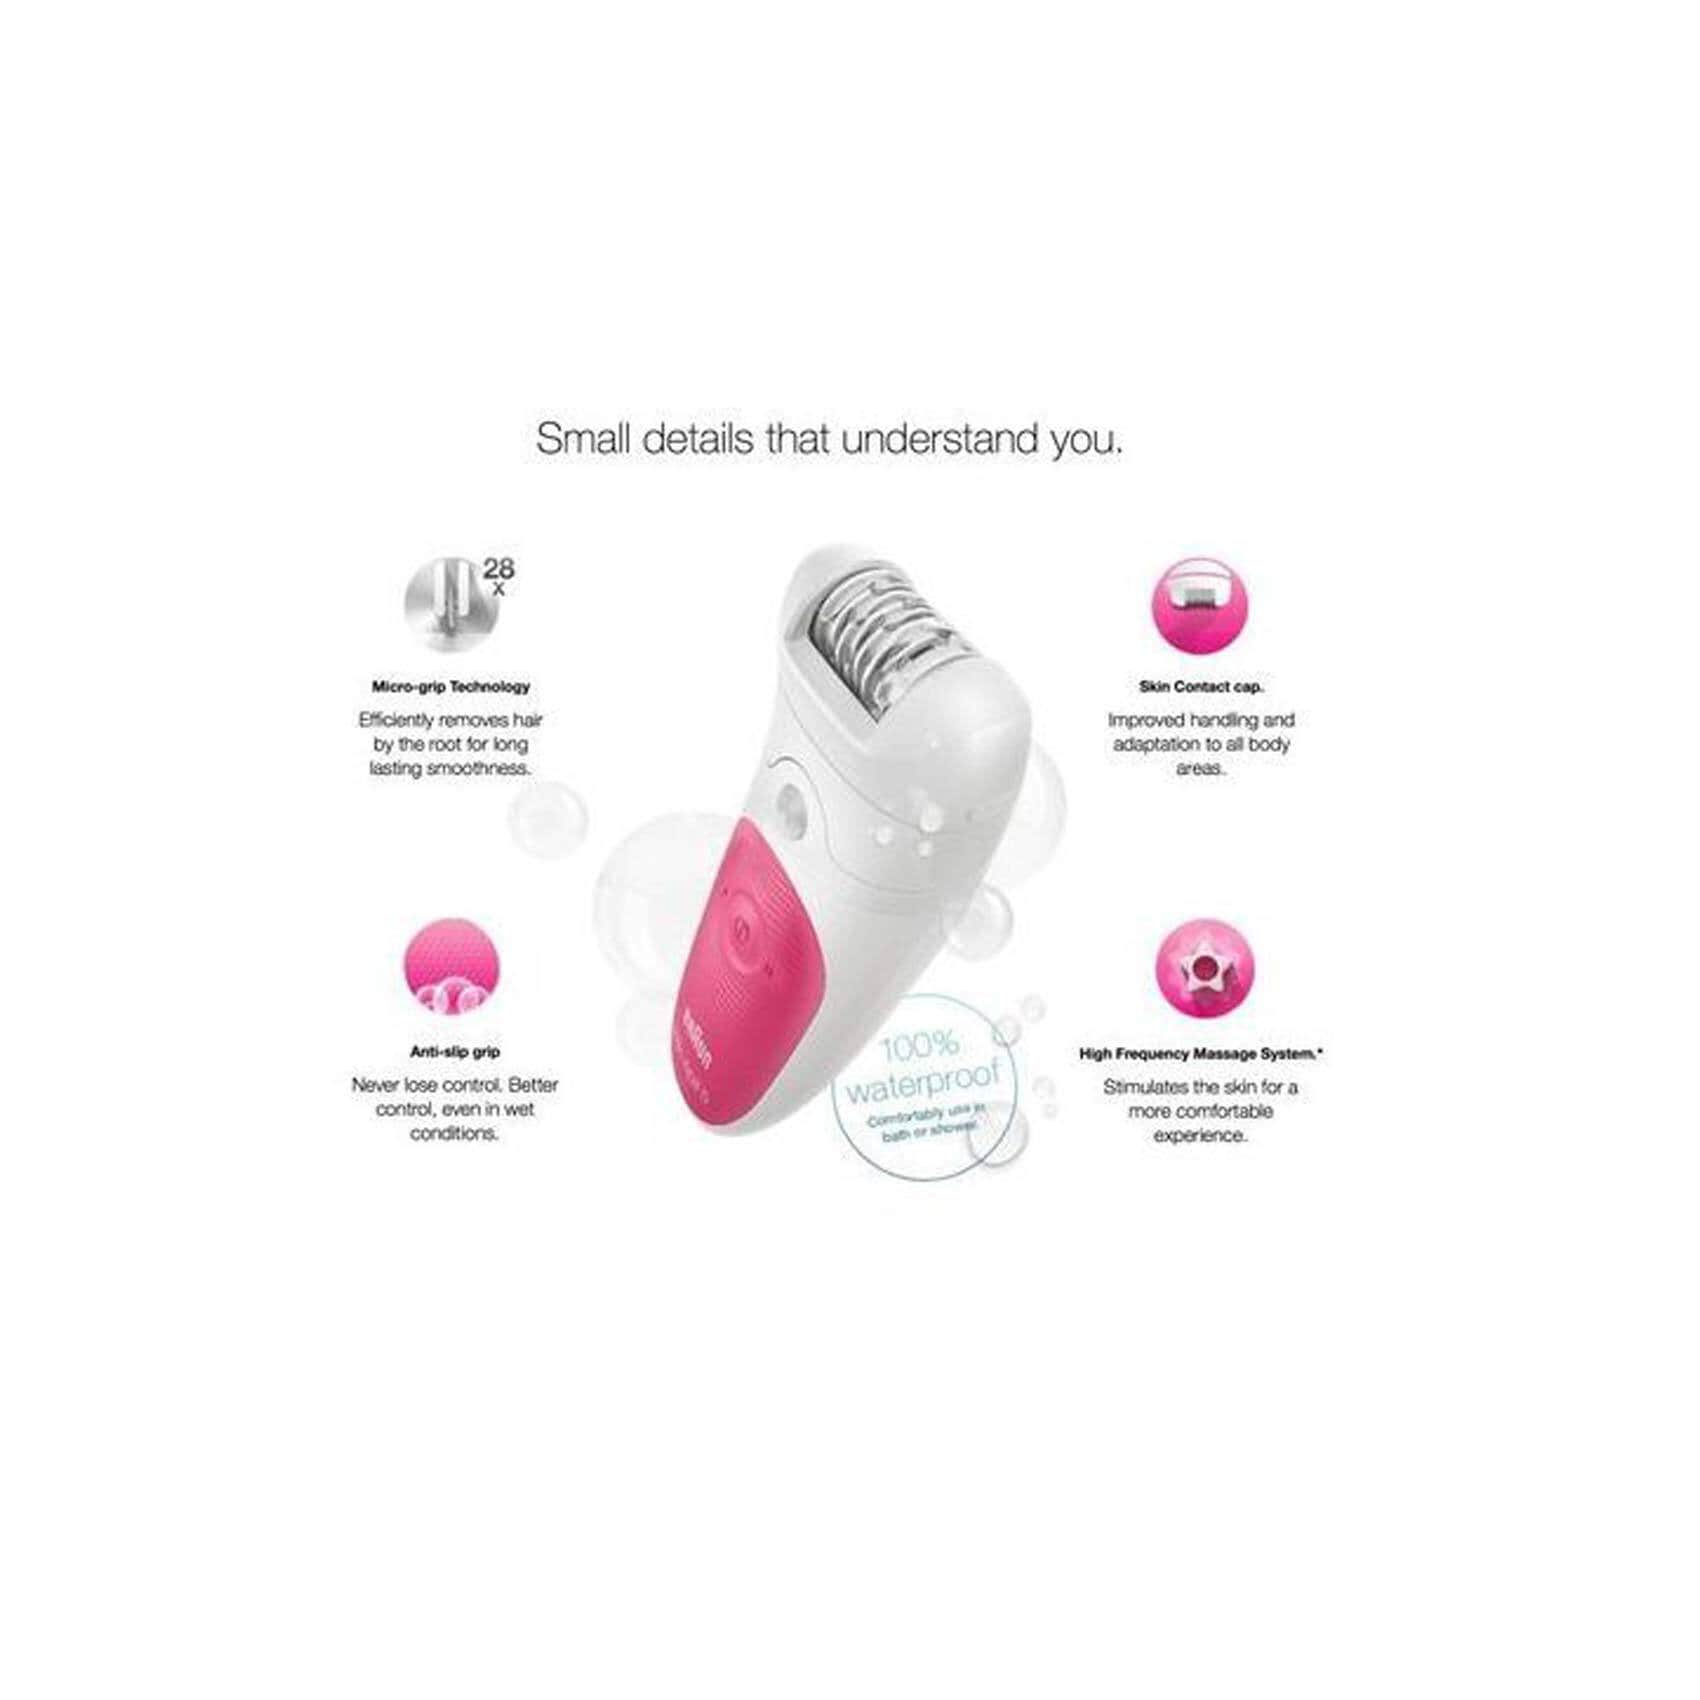 Cordless Braun 5-513 Silk Personal Shop Epilator Epil Egypt Beauty Dry Buy and on Care Online 5 Carrefour Pink Wet - & -